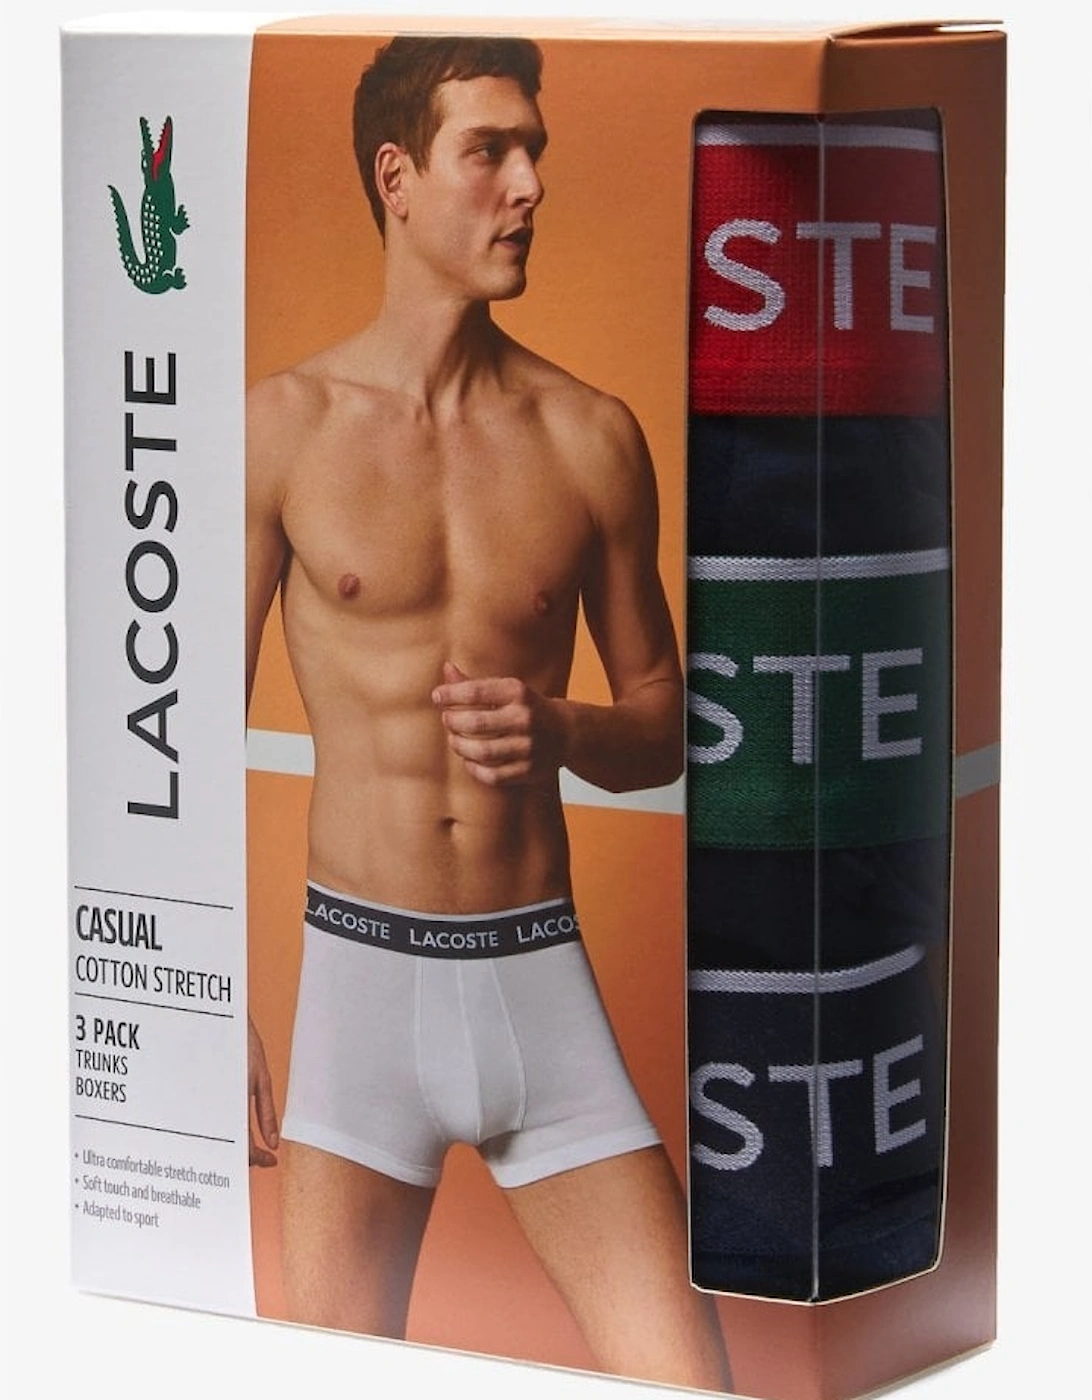 Men's 3 Pack Boxers With Branded Waistband